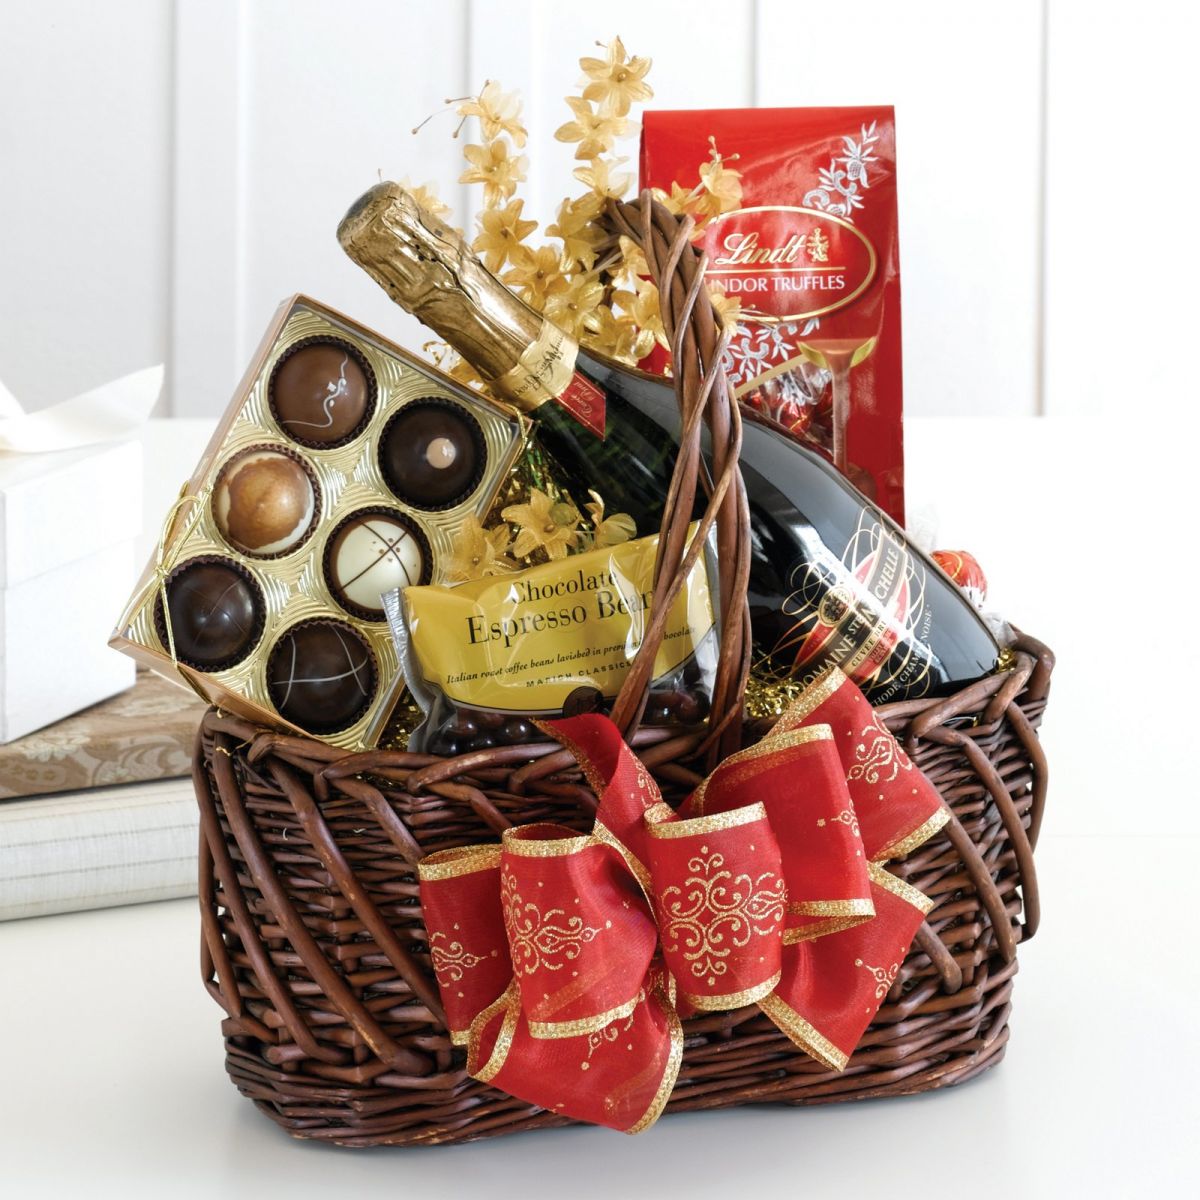 Top 5 Amazing Gift Basket Ideas That You'll Love | Cool Picking